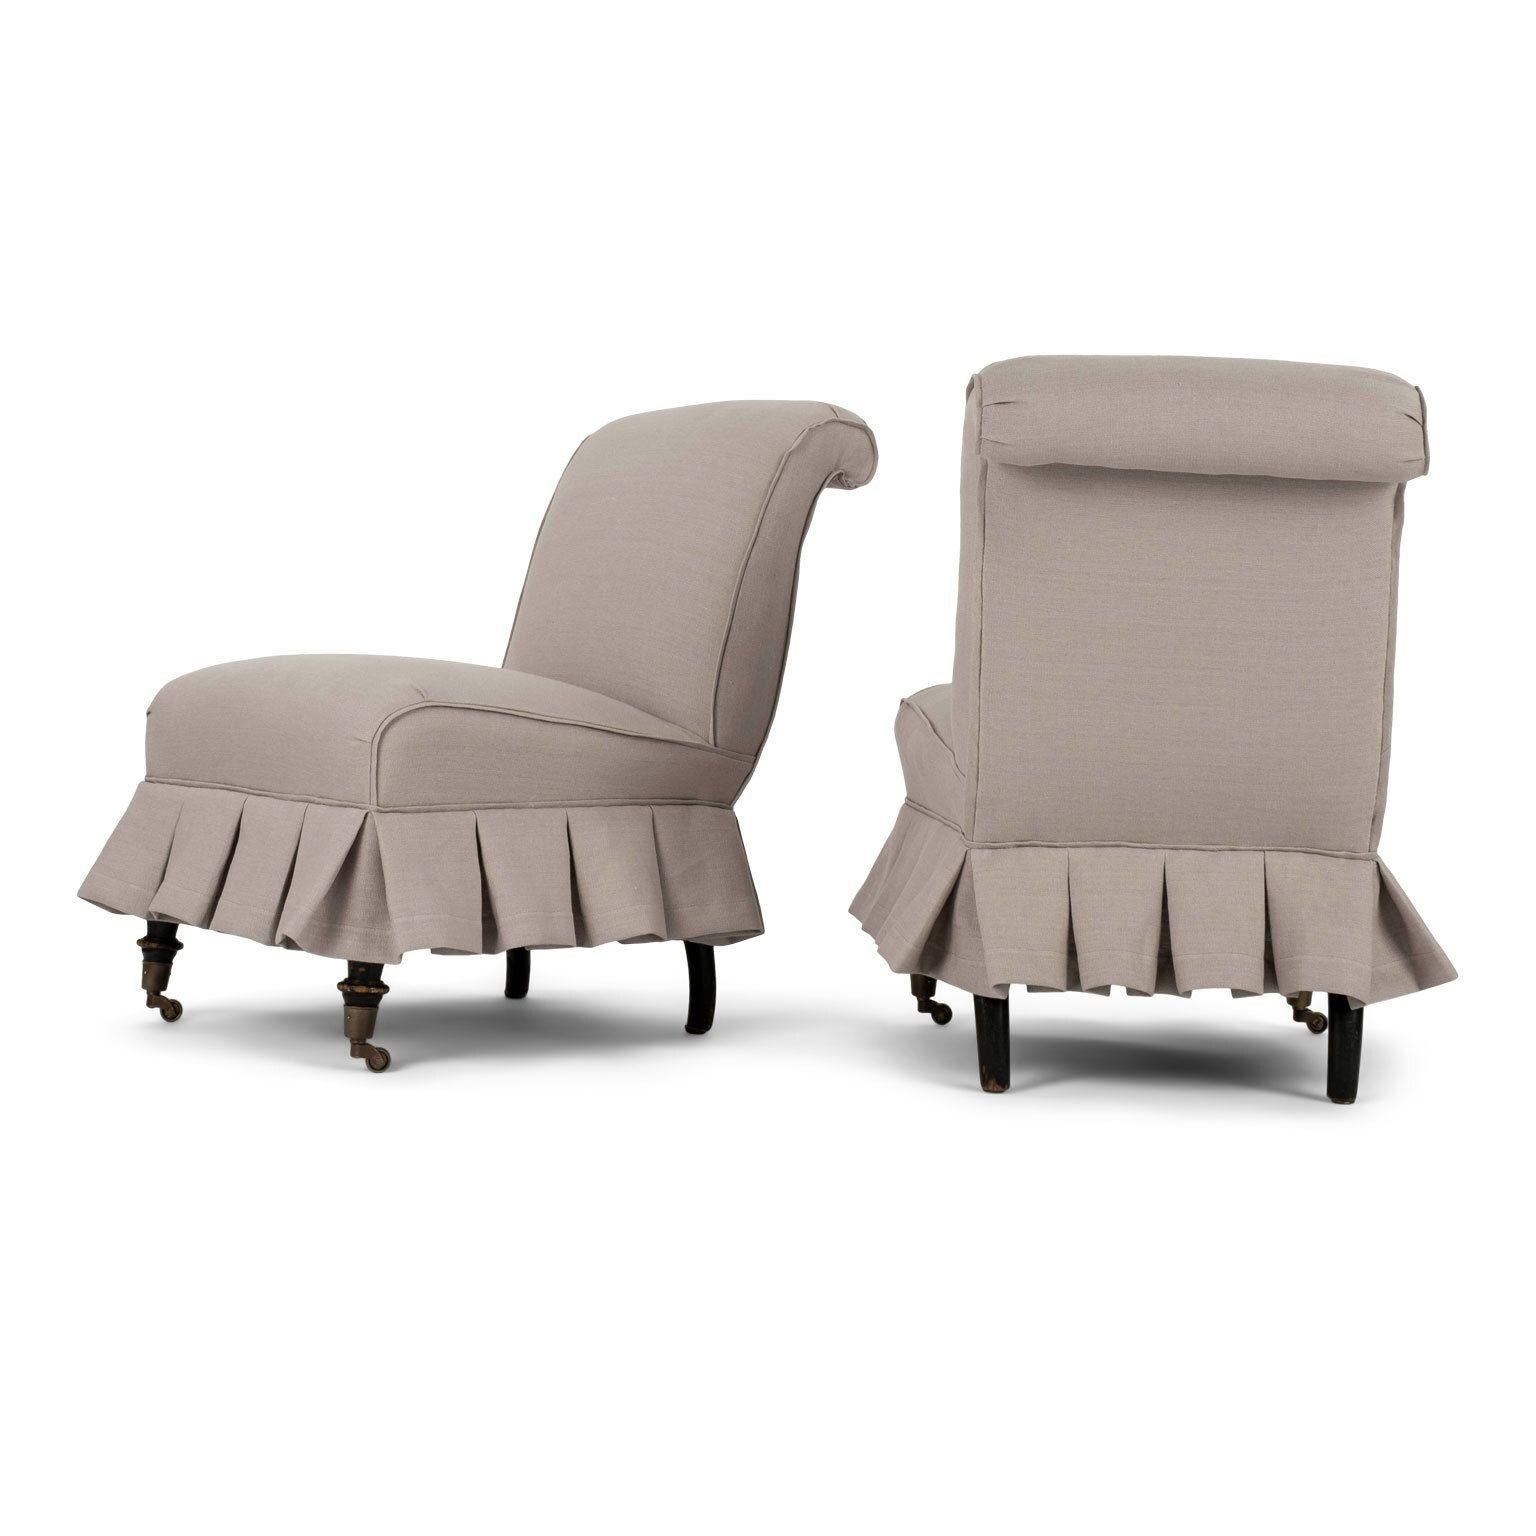 Pair of French Napoleon III Slipper Chairs in Lavender Linen 4